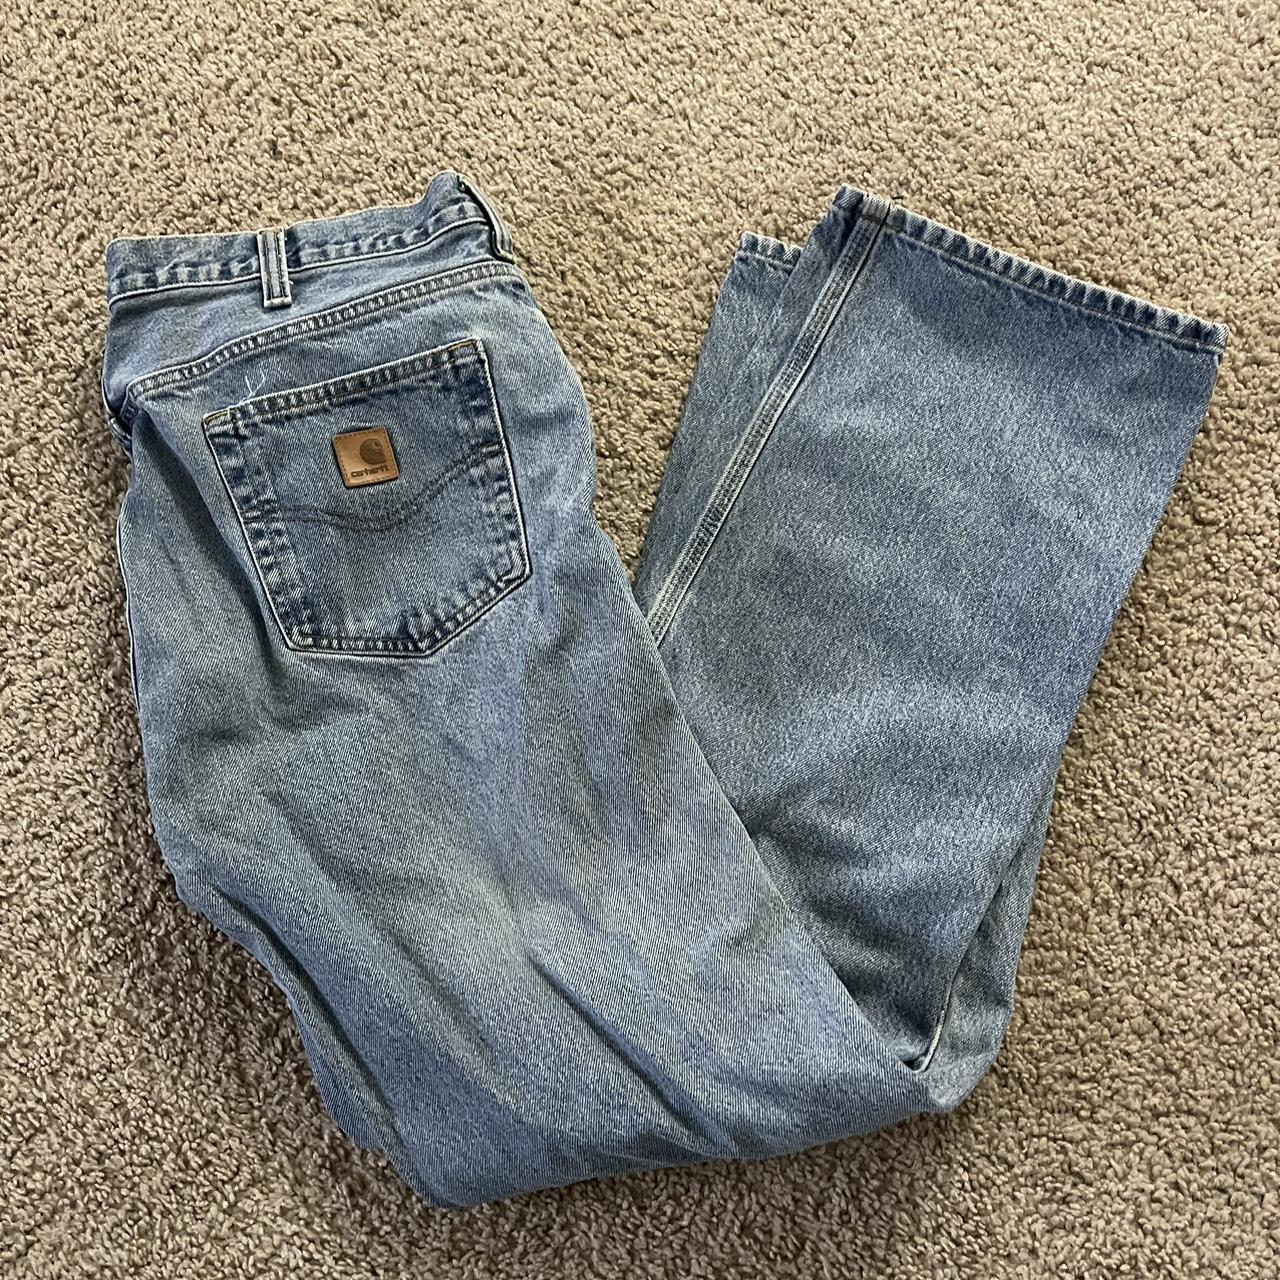 Carhartt WIP Men's Blue and Navy Jeans